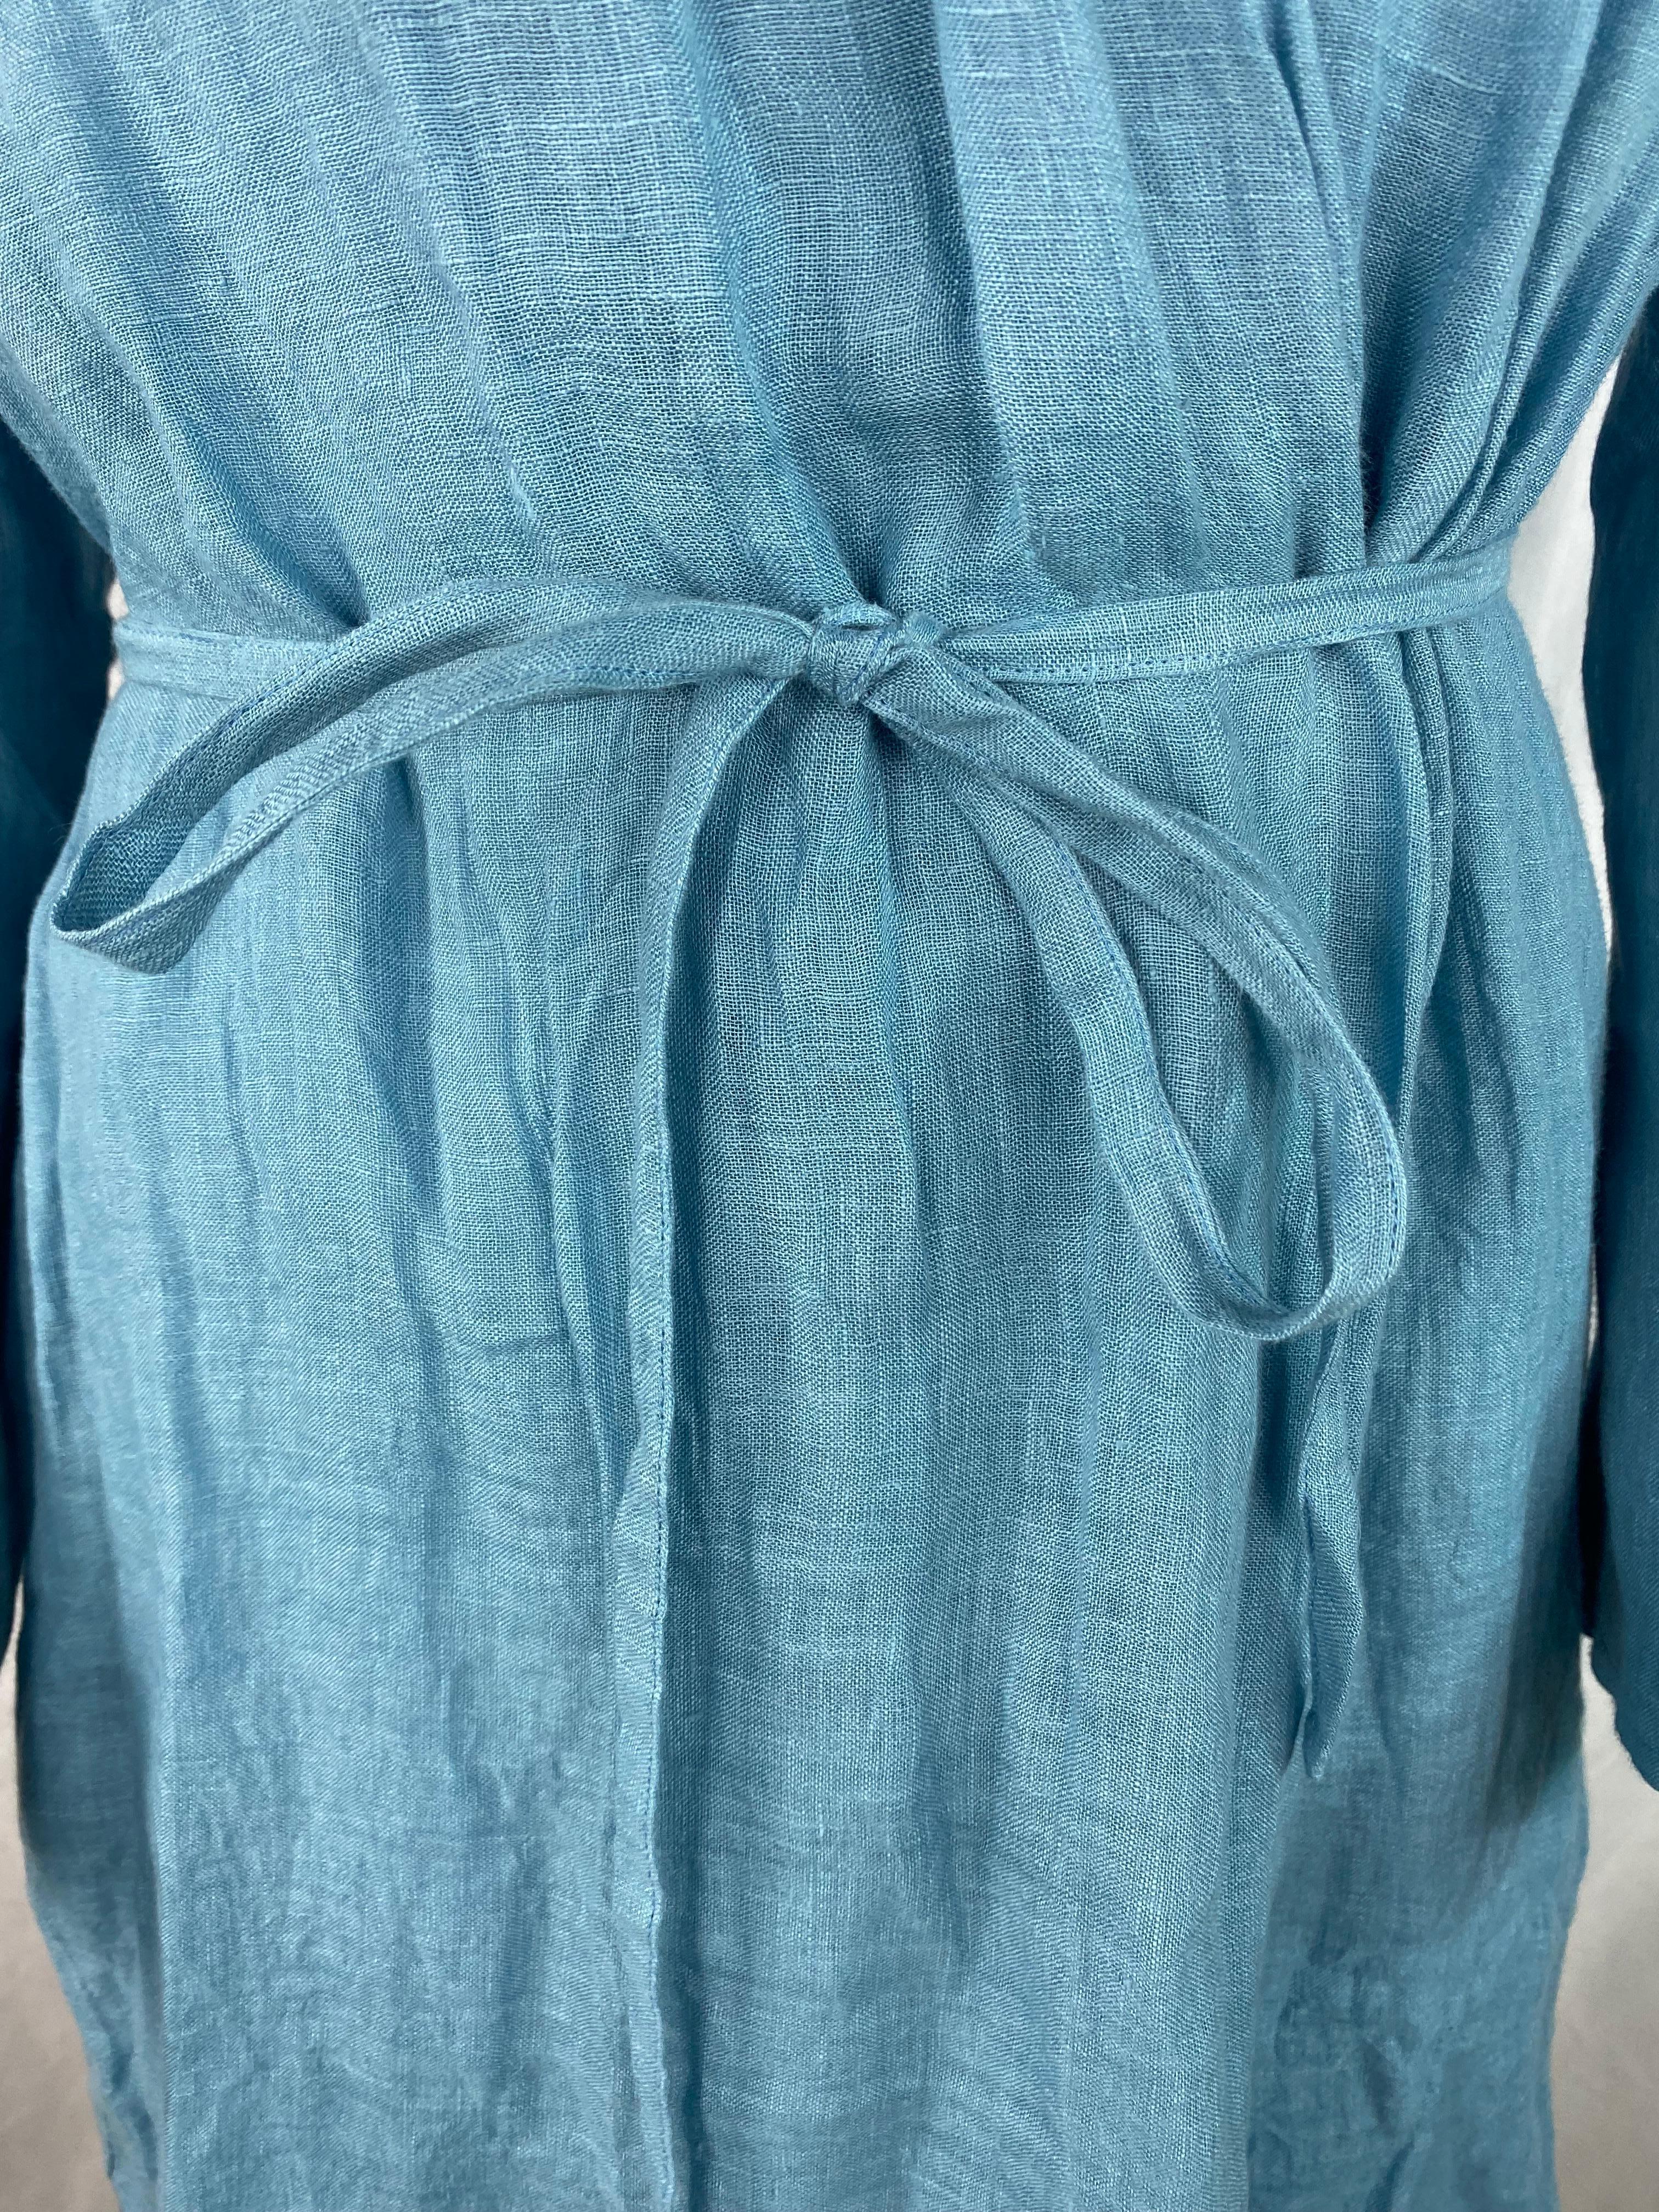 Product details:

The robe is made out of 100% linen, featuring baby blue color, mid length and tie around the waist closure.